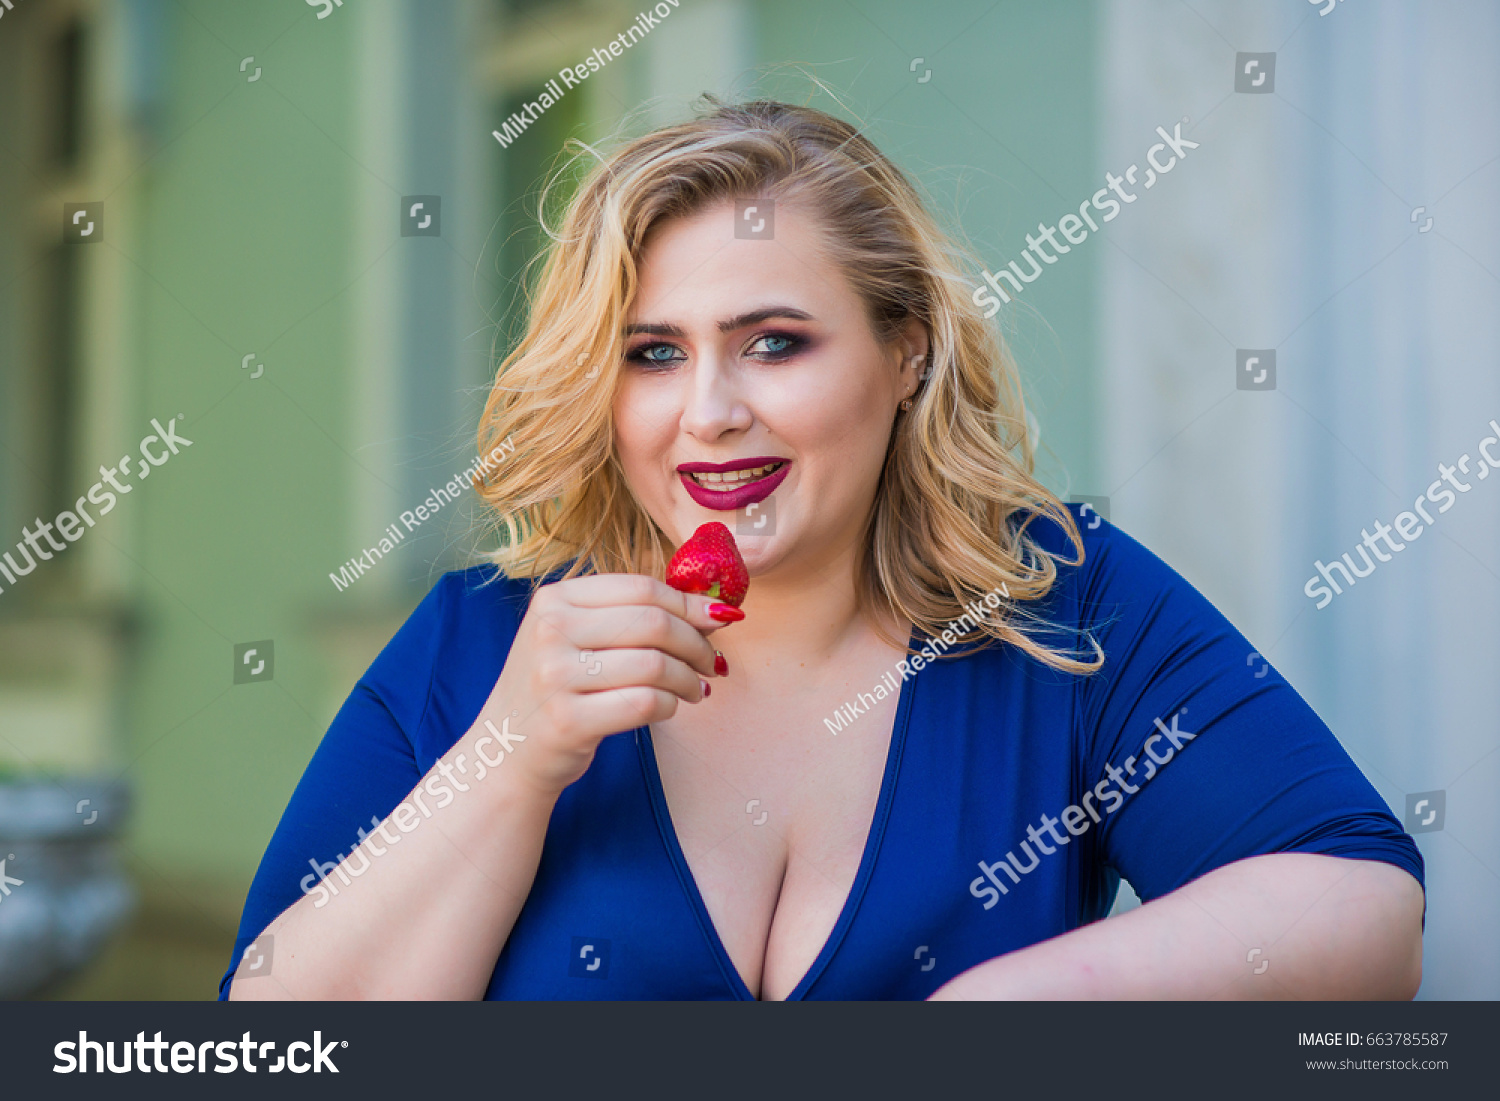 Hot and sexy bbw